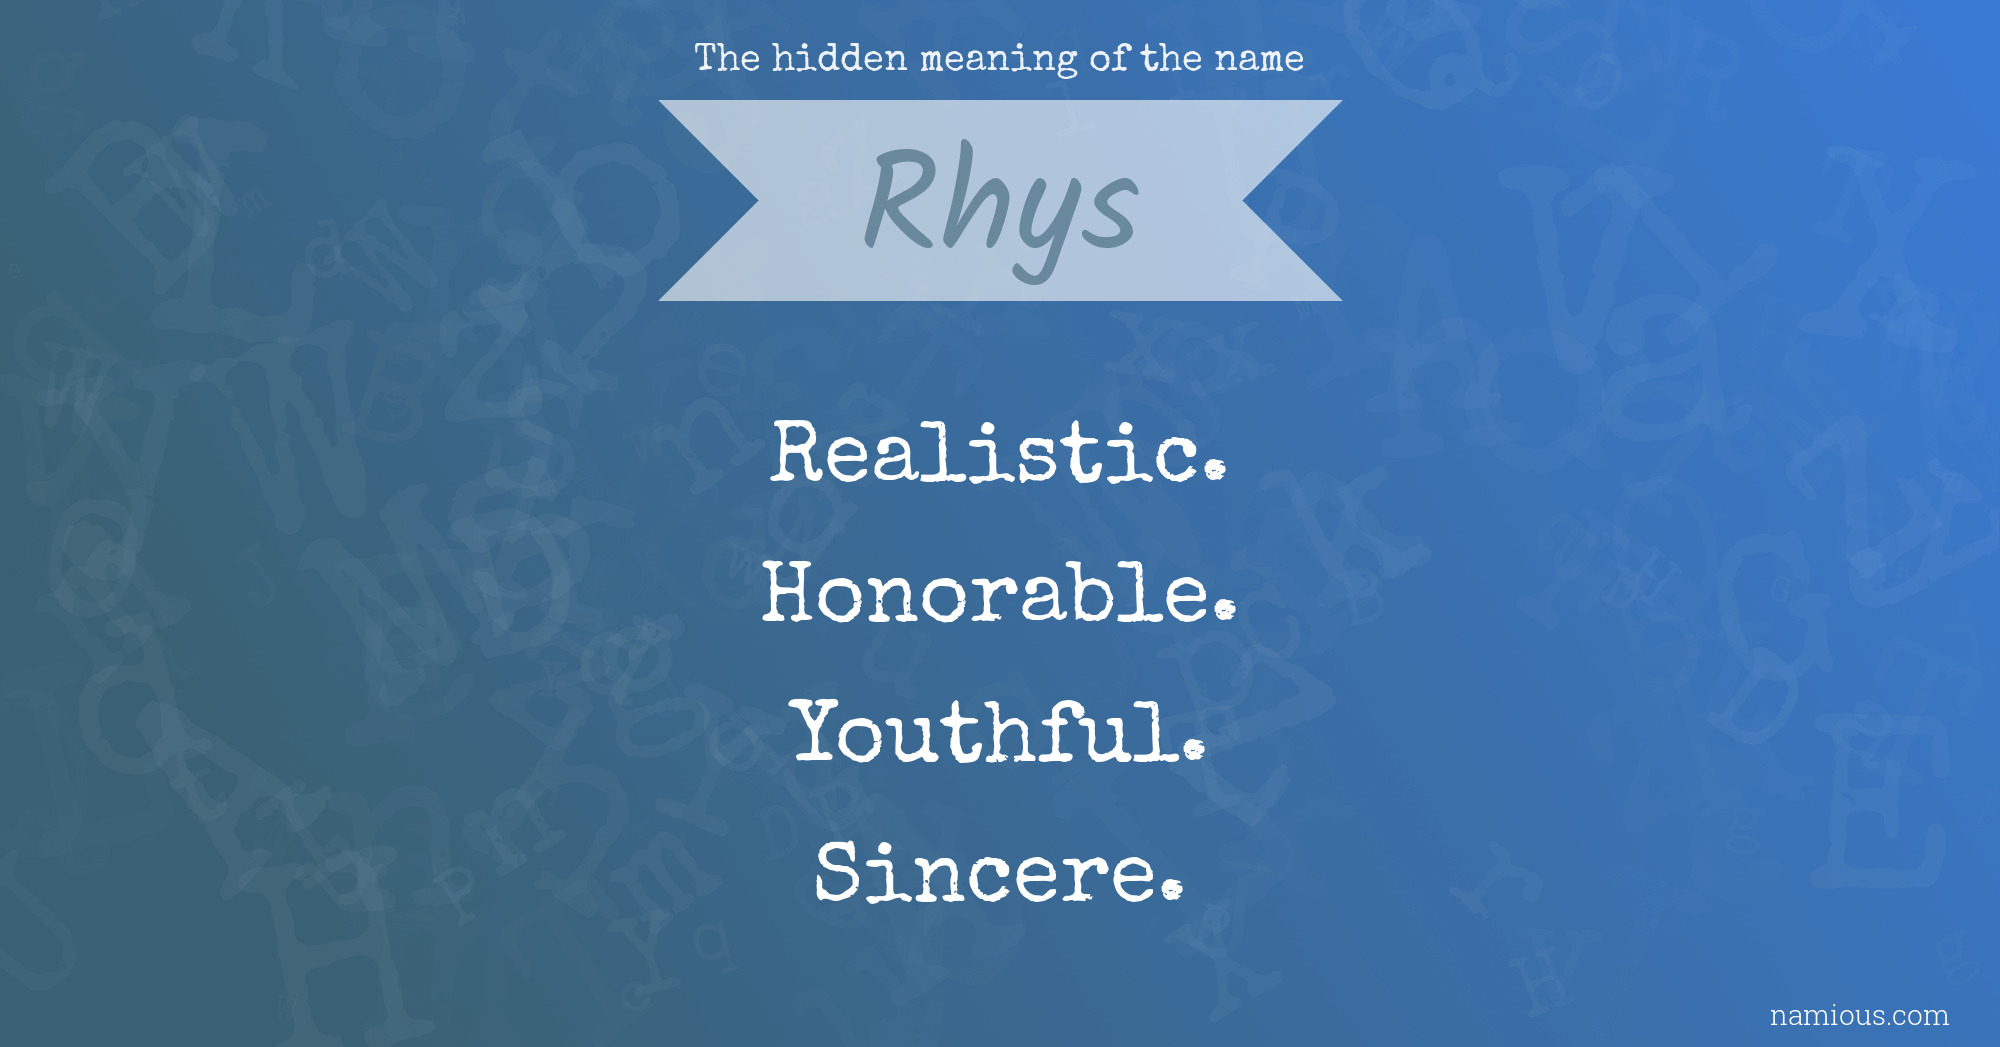 The hidden meaning of the name Rhys | Namious